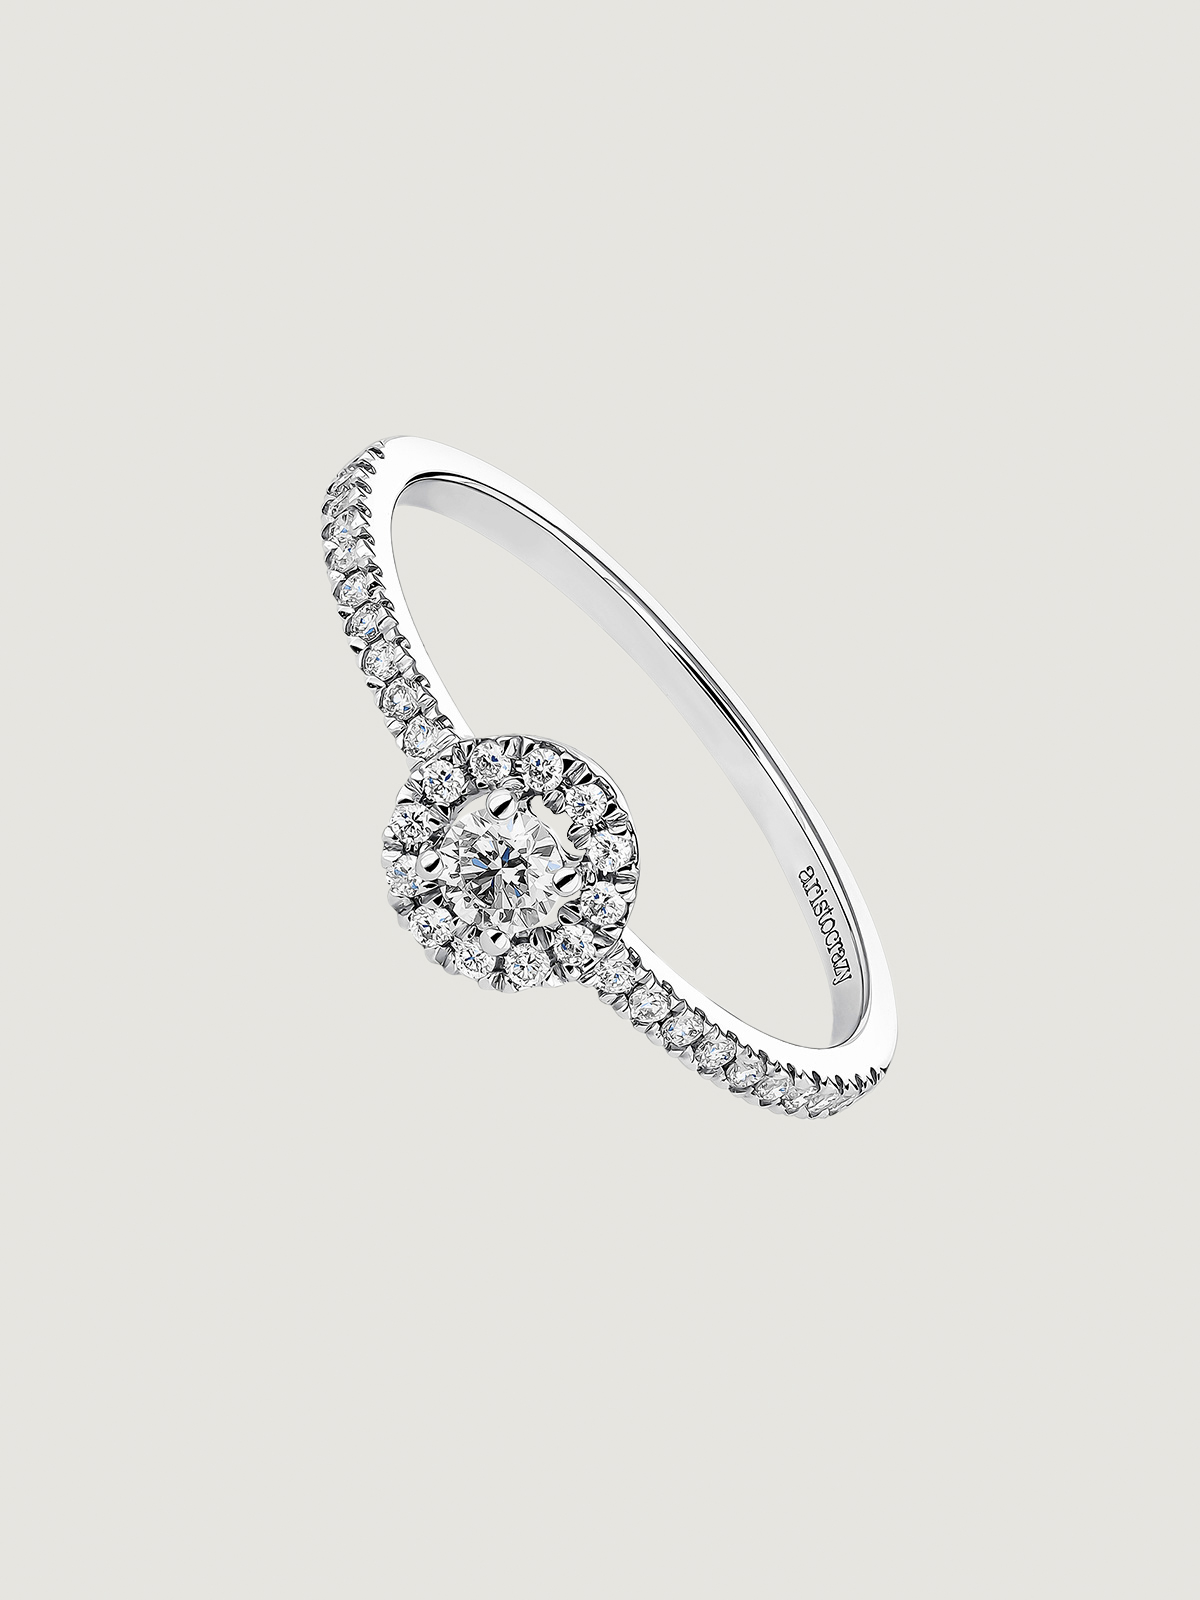 18K white gold ring with diamonds on the band and rosette.